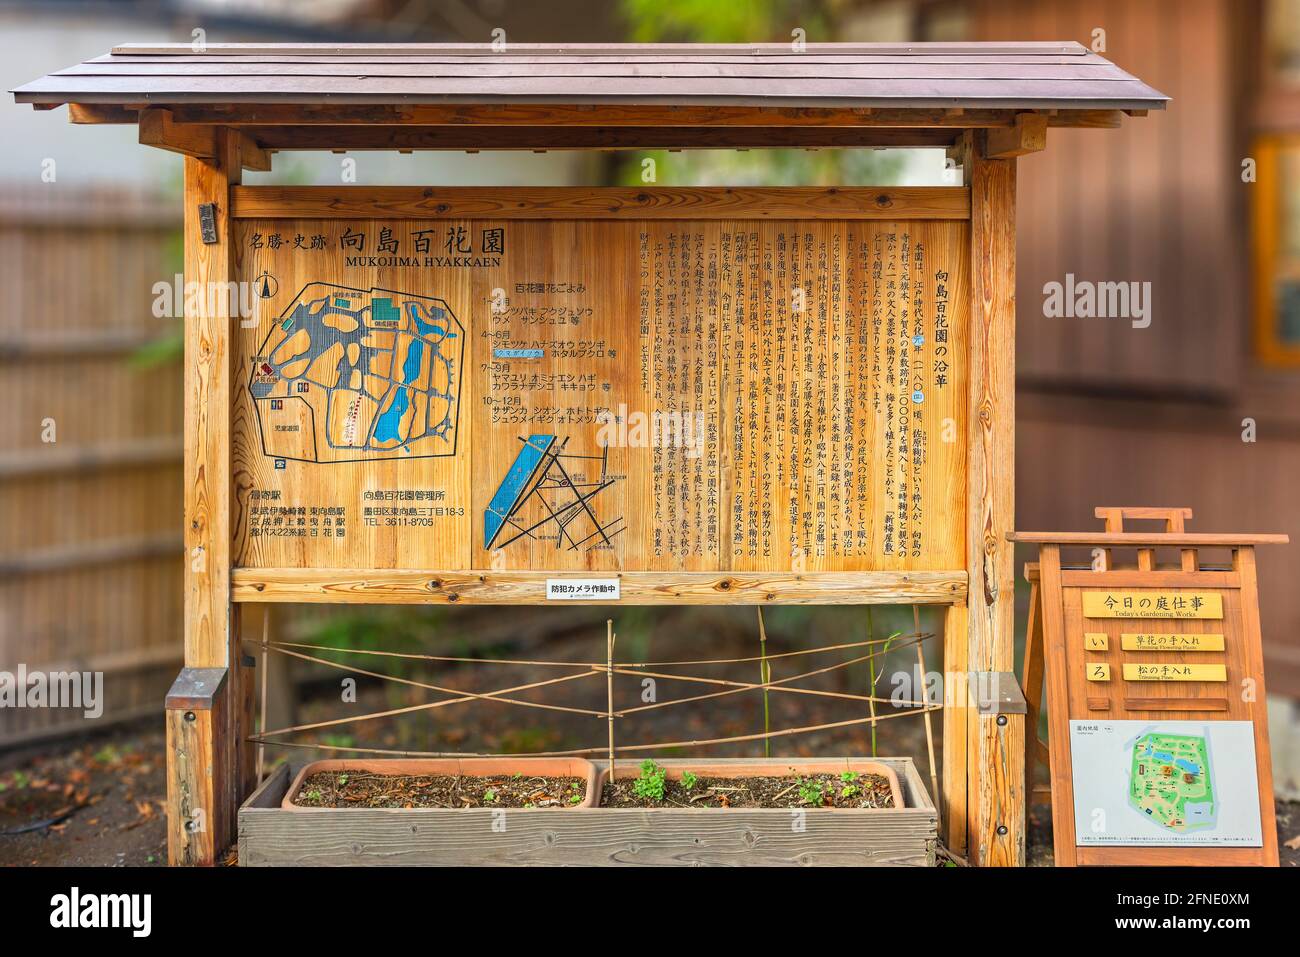 tokyo, japan - november 13 2020: Wooden information signboard overlooked by an awning and adorned with a carved pyrography map about the history of th Stock Photo